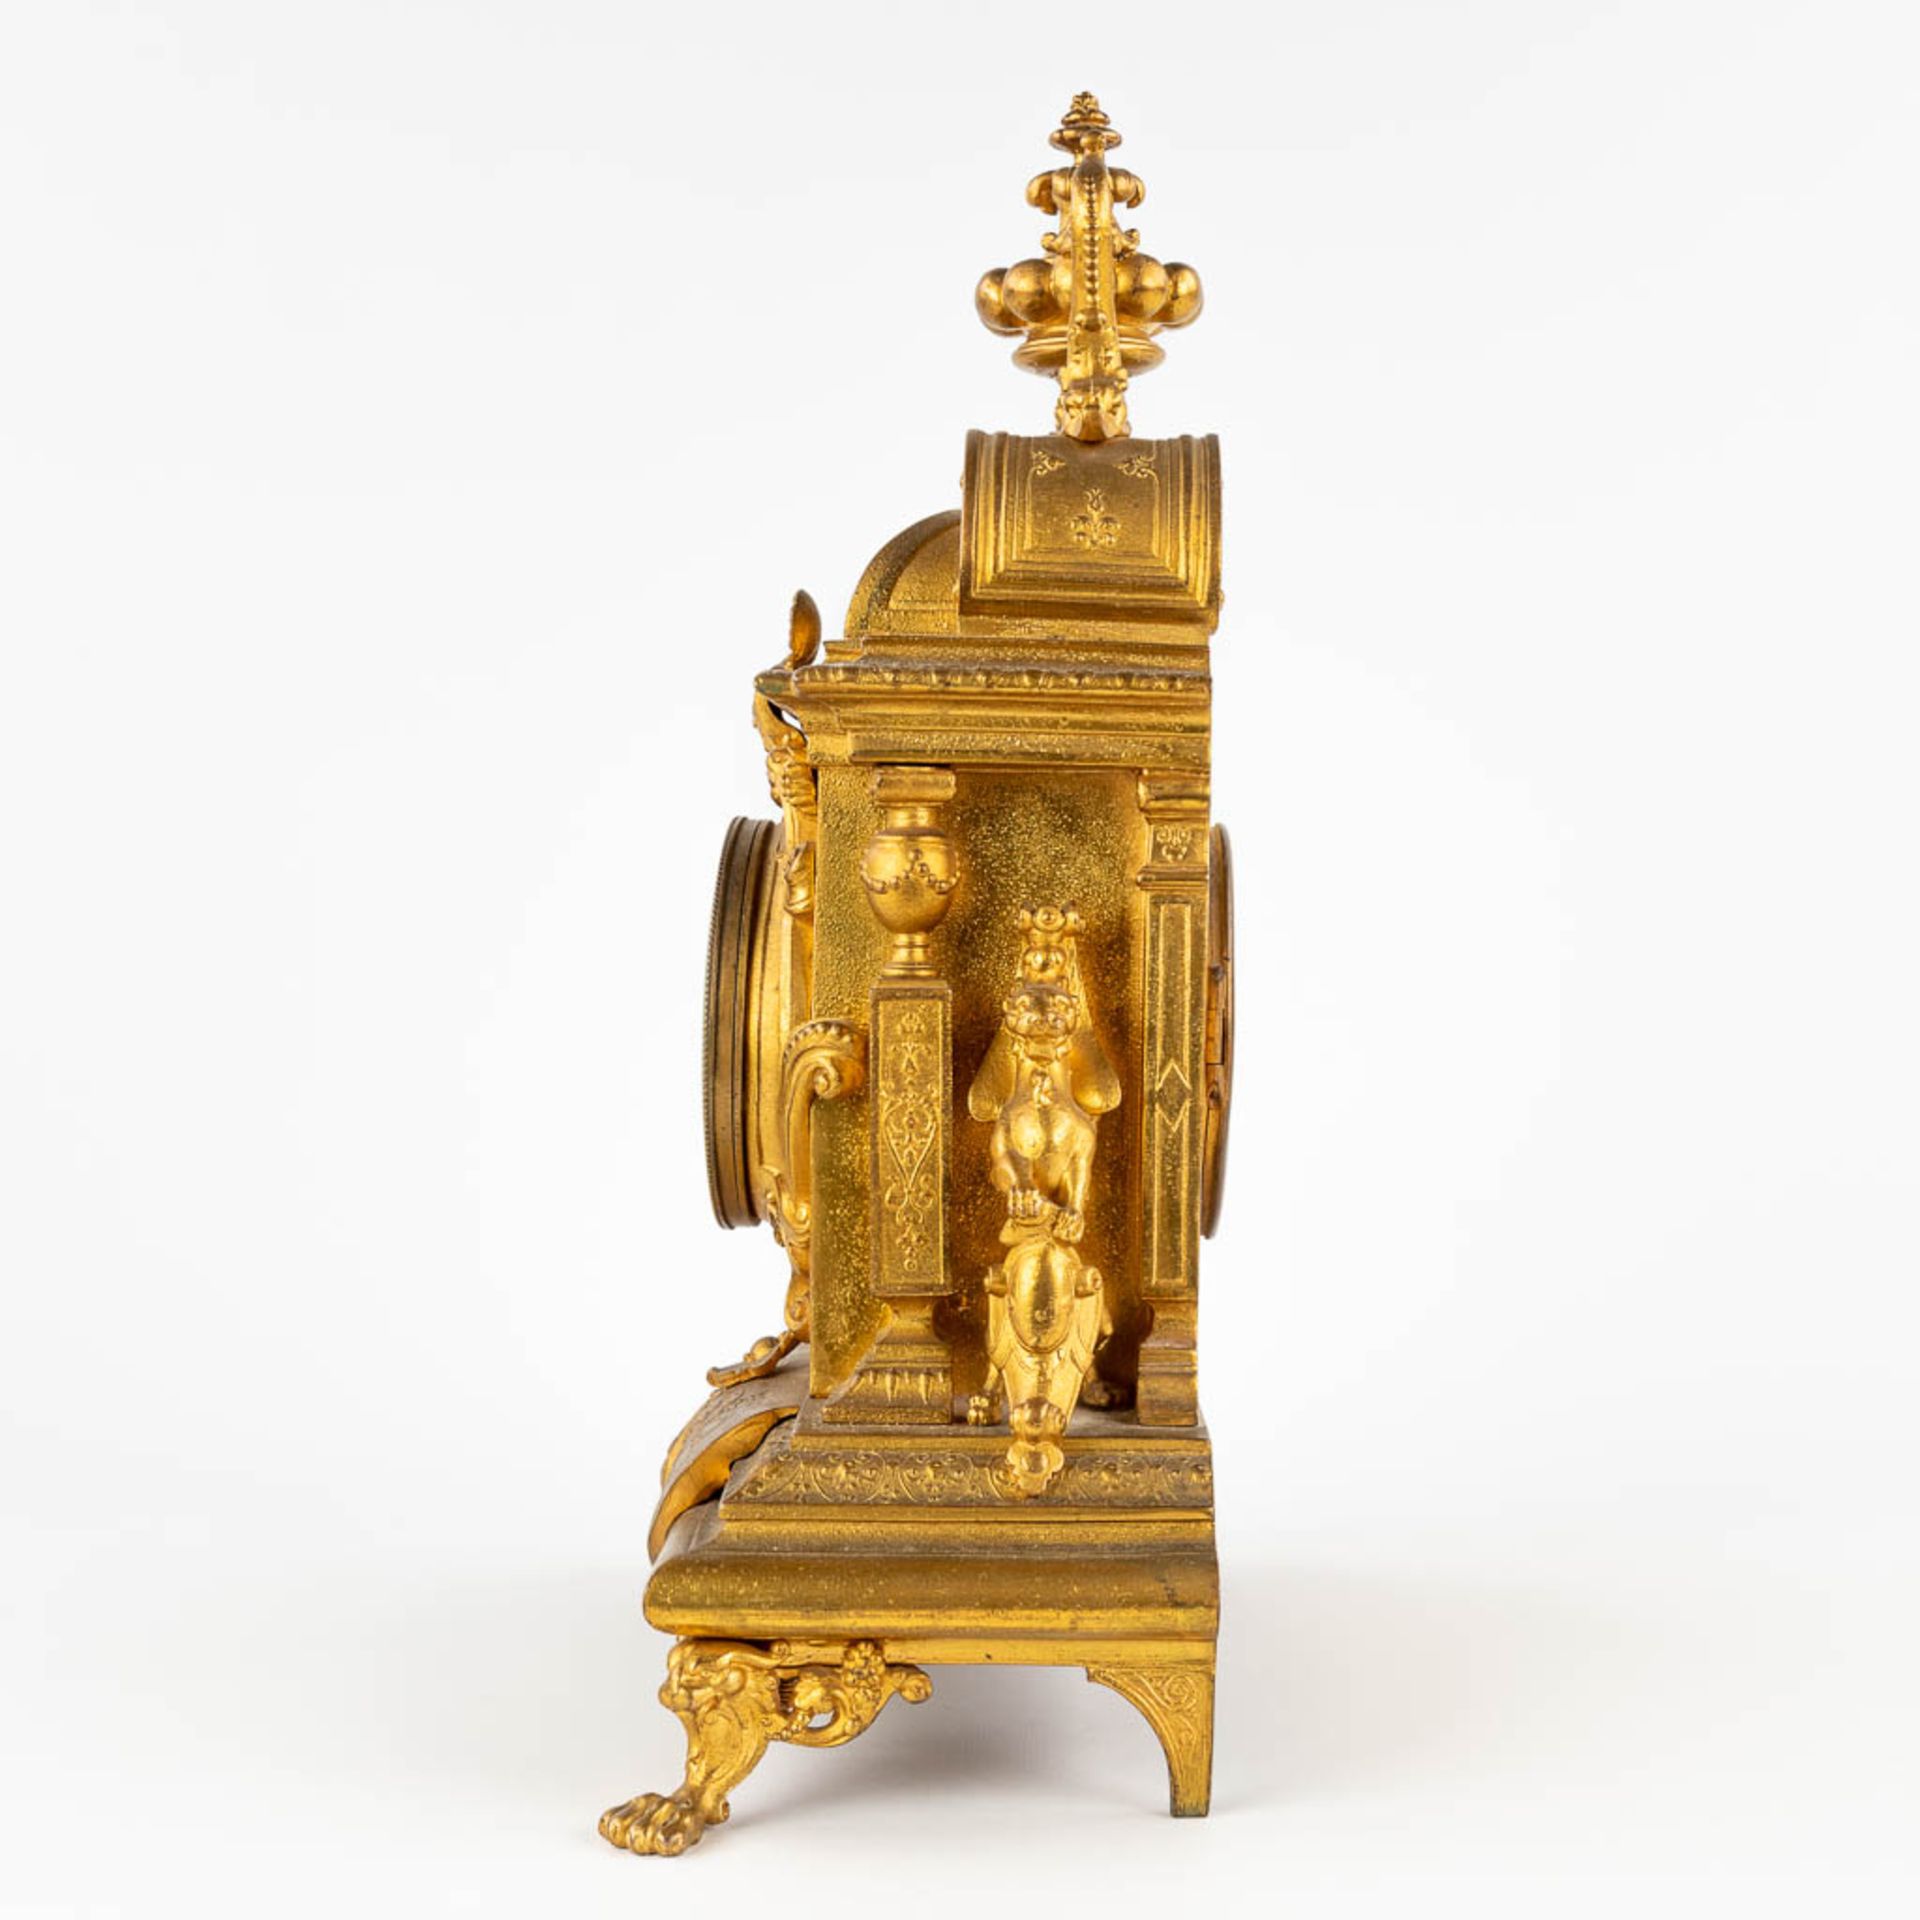 A mantle clock, Neoclassical style, gilt spelter. 19th C. (D:13 x W:27 x H:40 cm) - Image 7 of 13